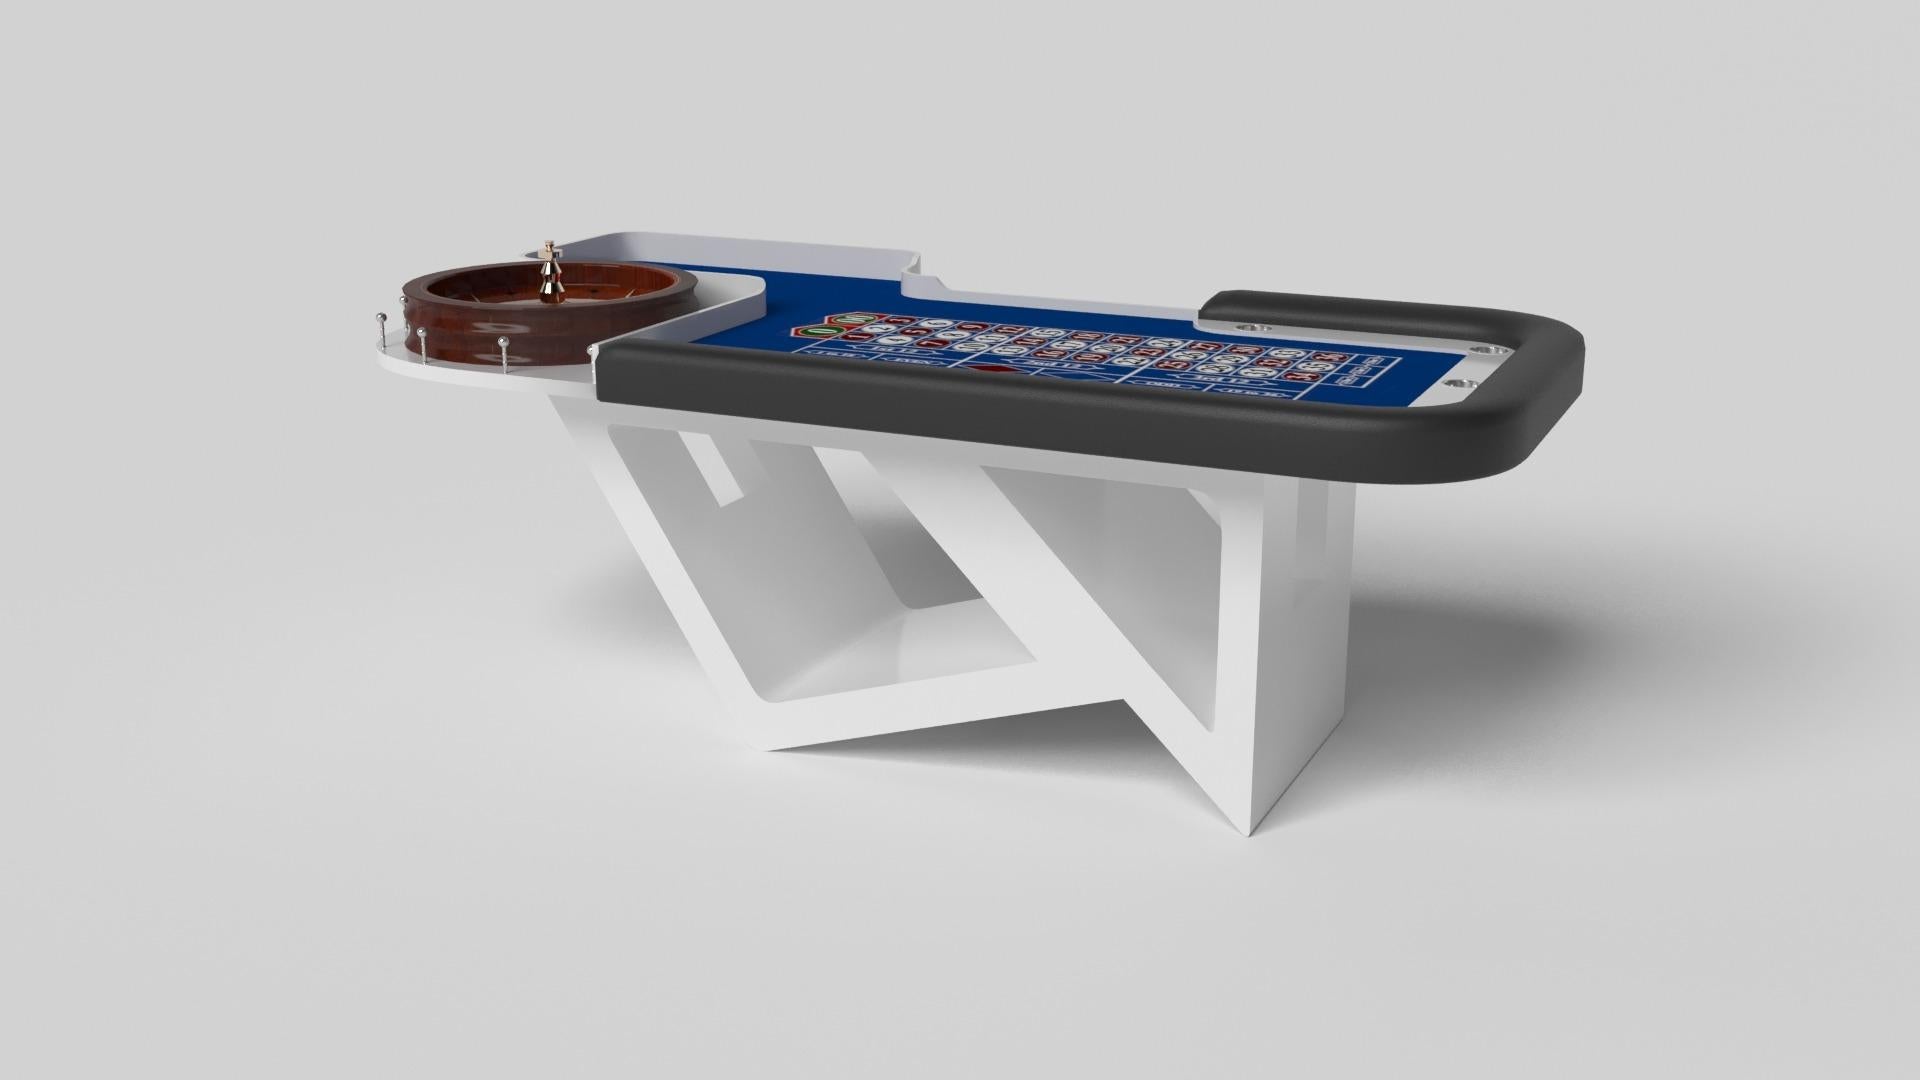 Drawing inspiration from the beauty of geometric forms, the Rumba roulette table in brushed aluminum is characterized by a series of hollow and solid shapes that form an offset asymmetric base. Accented with a roulette wheel and bet blocks for